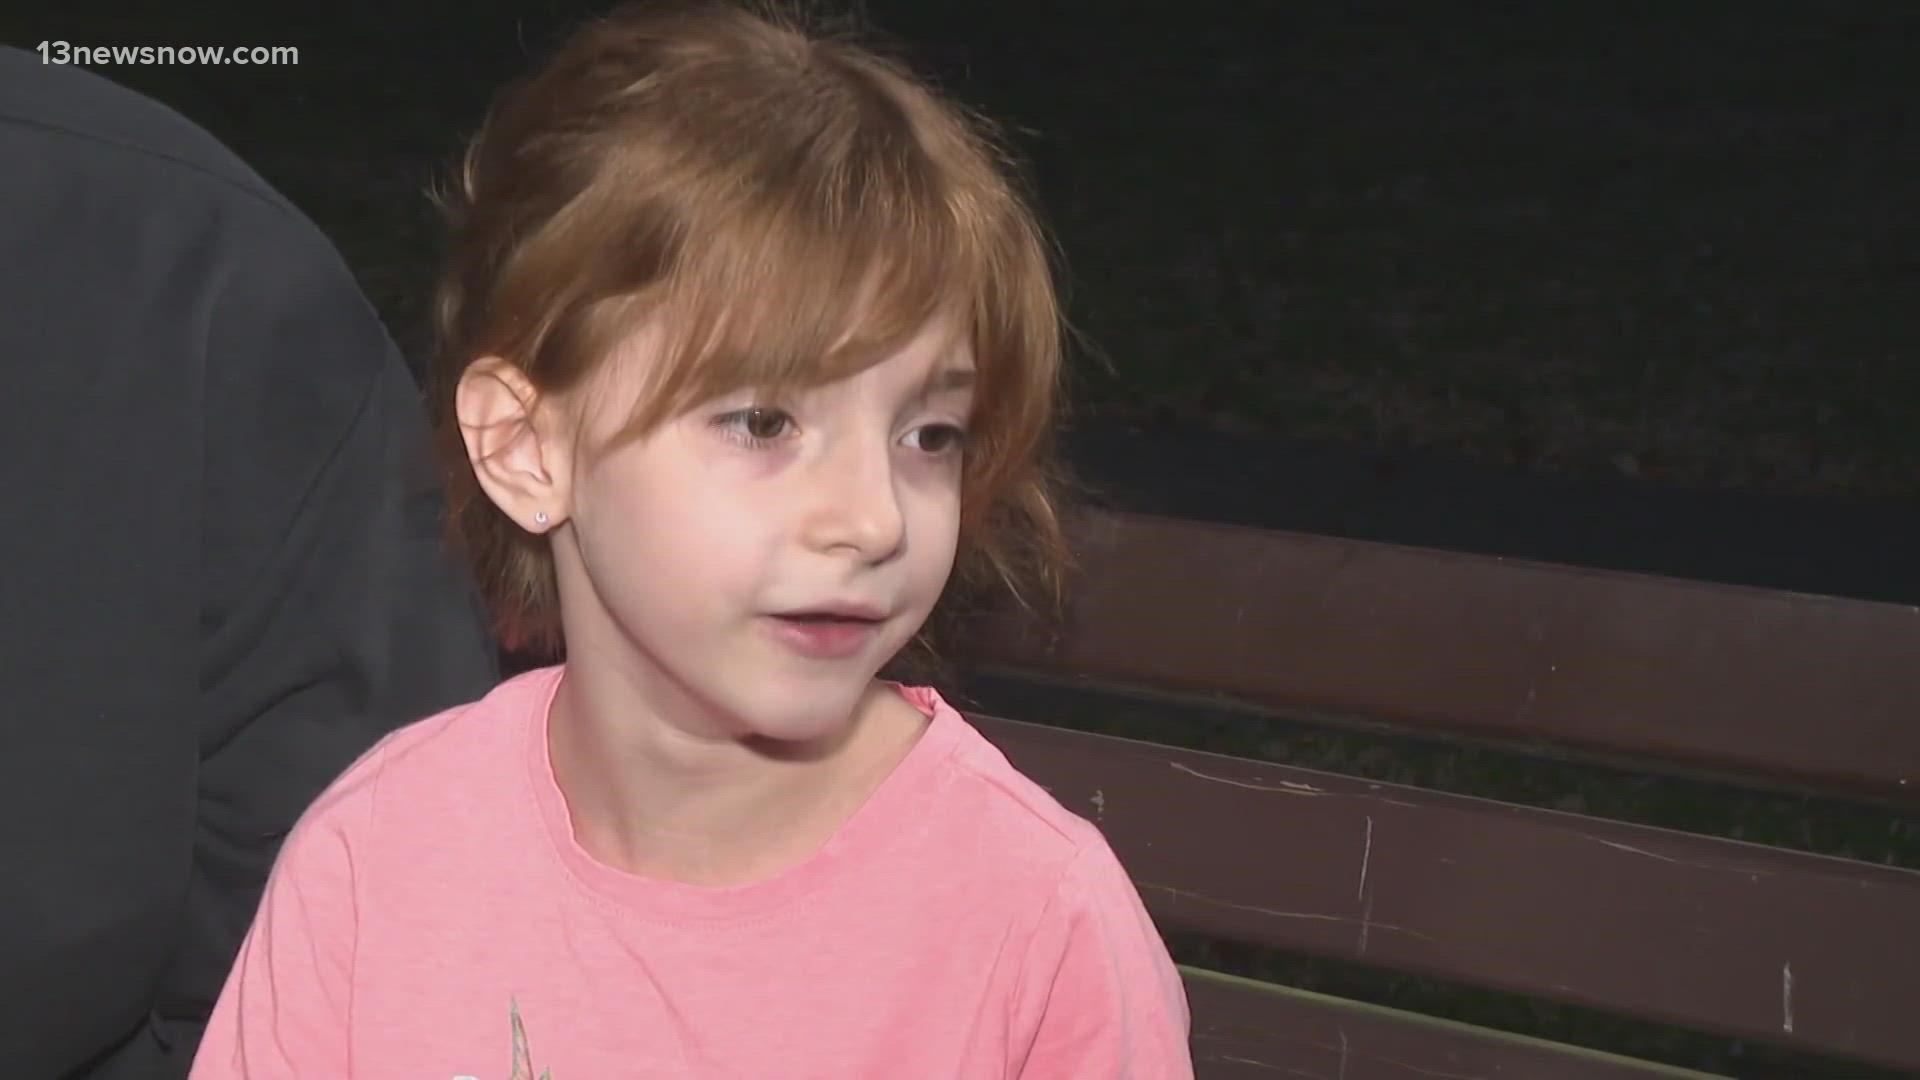 Skye Barnes said the boy accused of bringing the gun to Little Creek was her 7-year-old daughter's classmate.